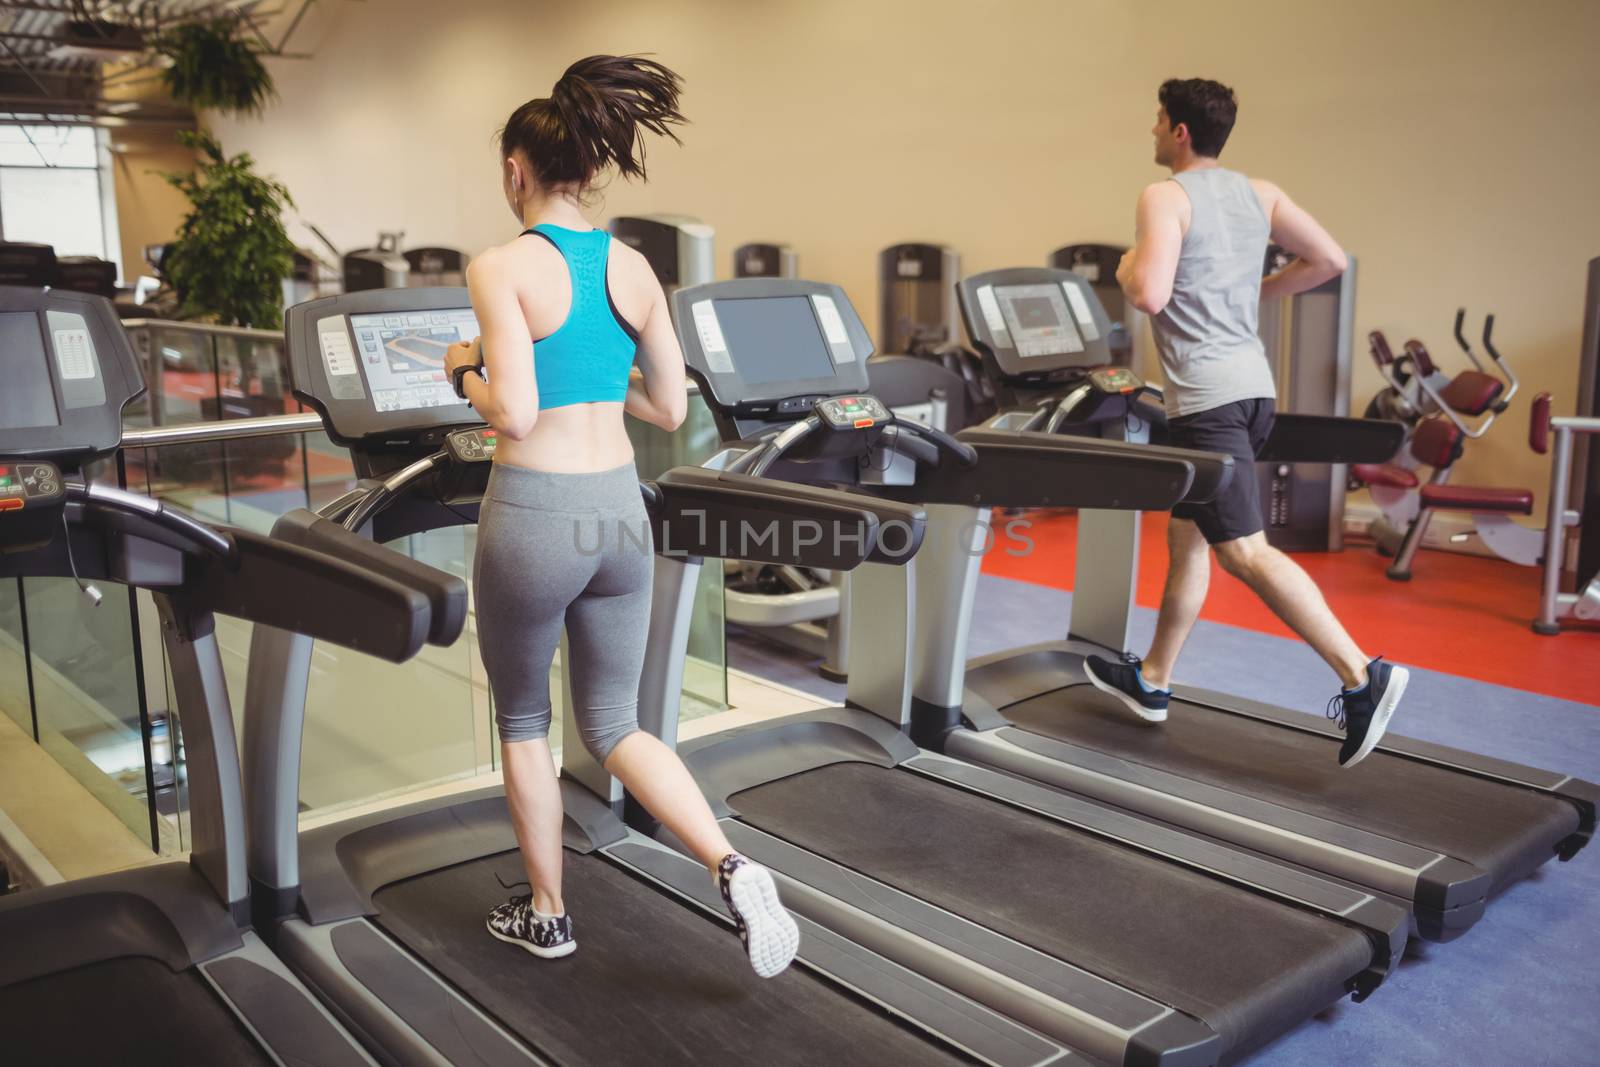 Fit people using the treadmill at the gym